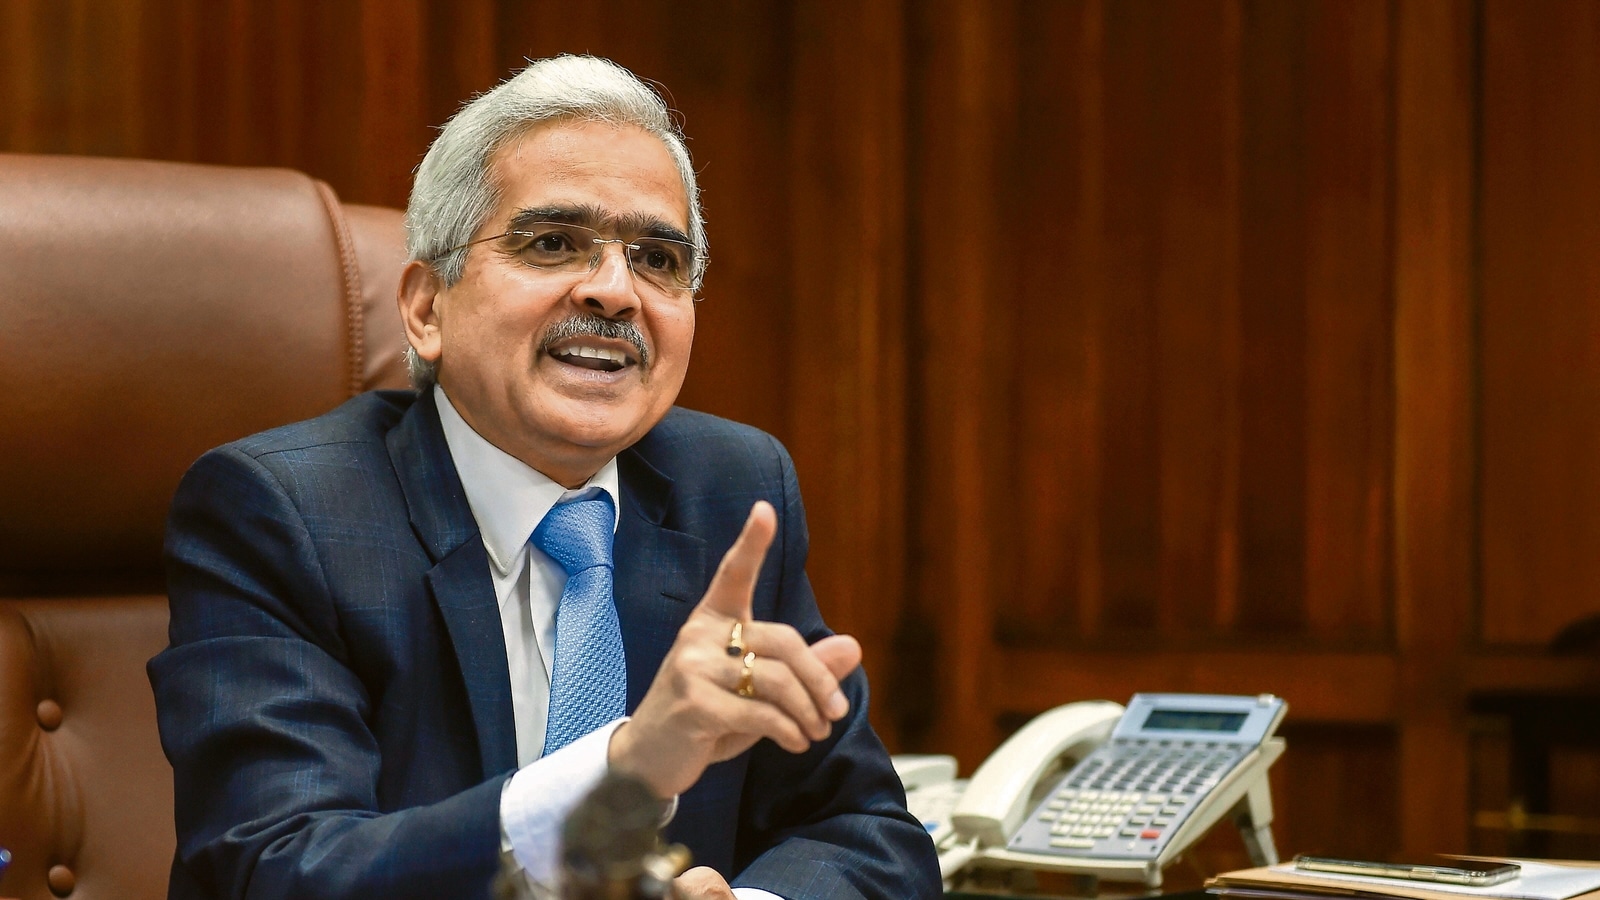 Shaktikanta Das reappointed as RBI governor for another 3 years - Hindustan Times